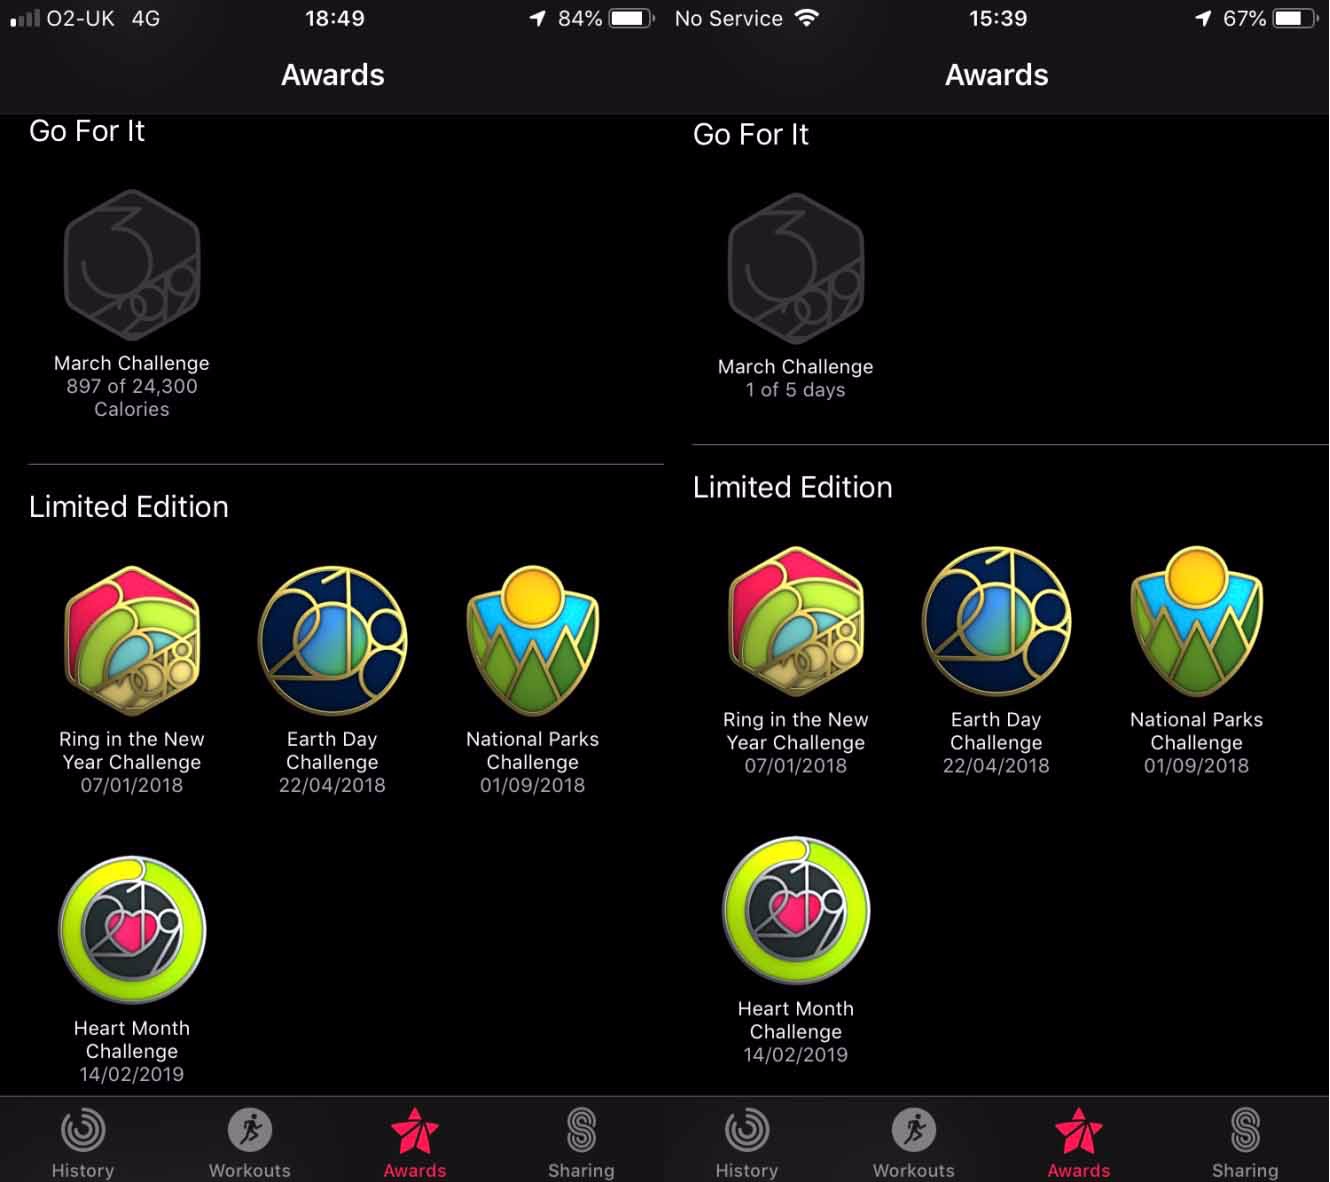 upcoming apple watch challenges 2019